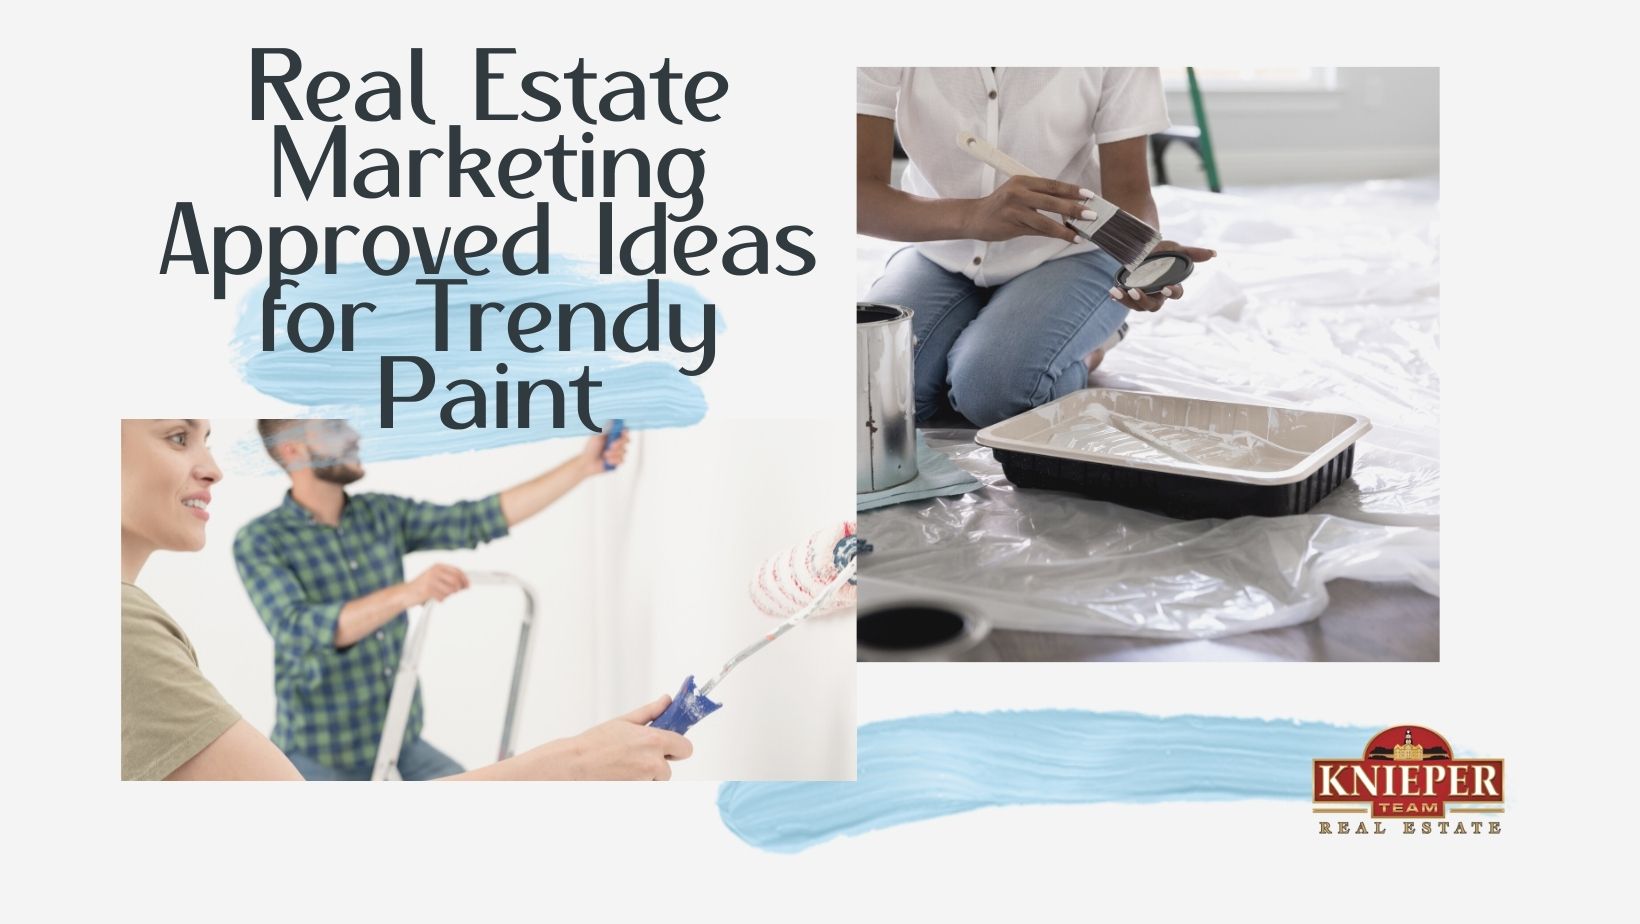 Real Estate Marketing Approved Ideas for Trendy Paint